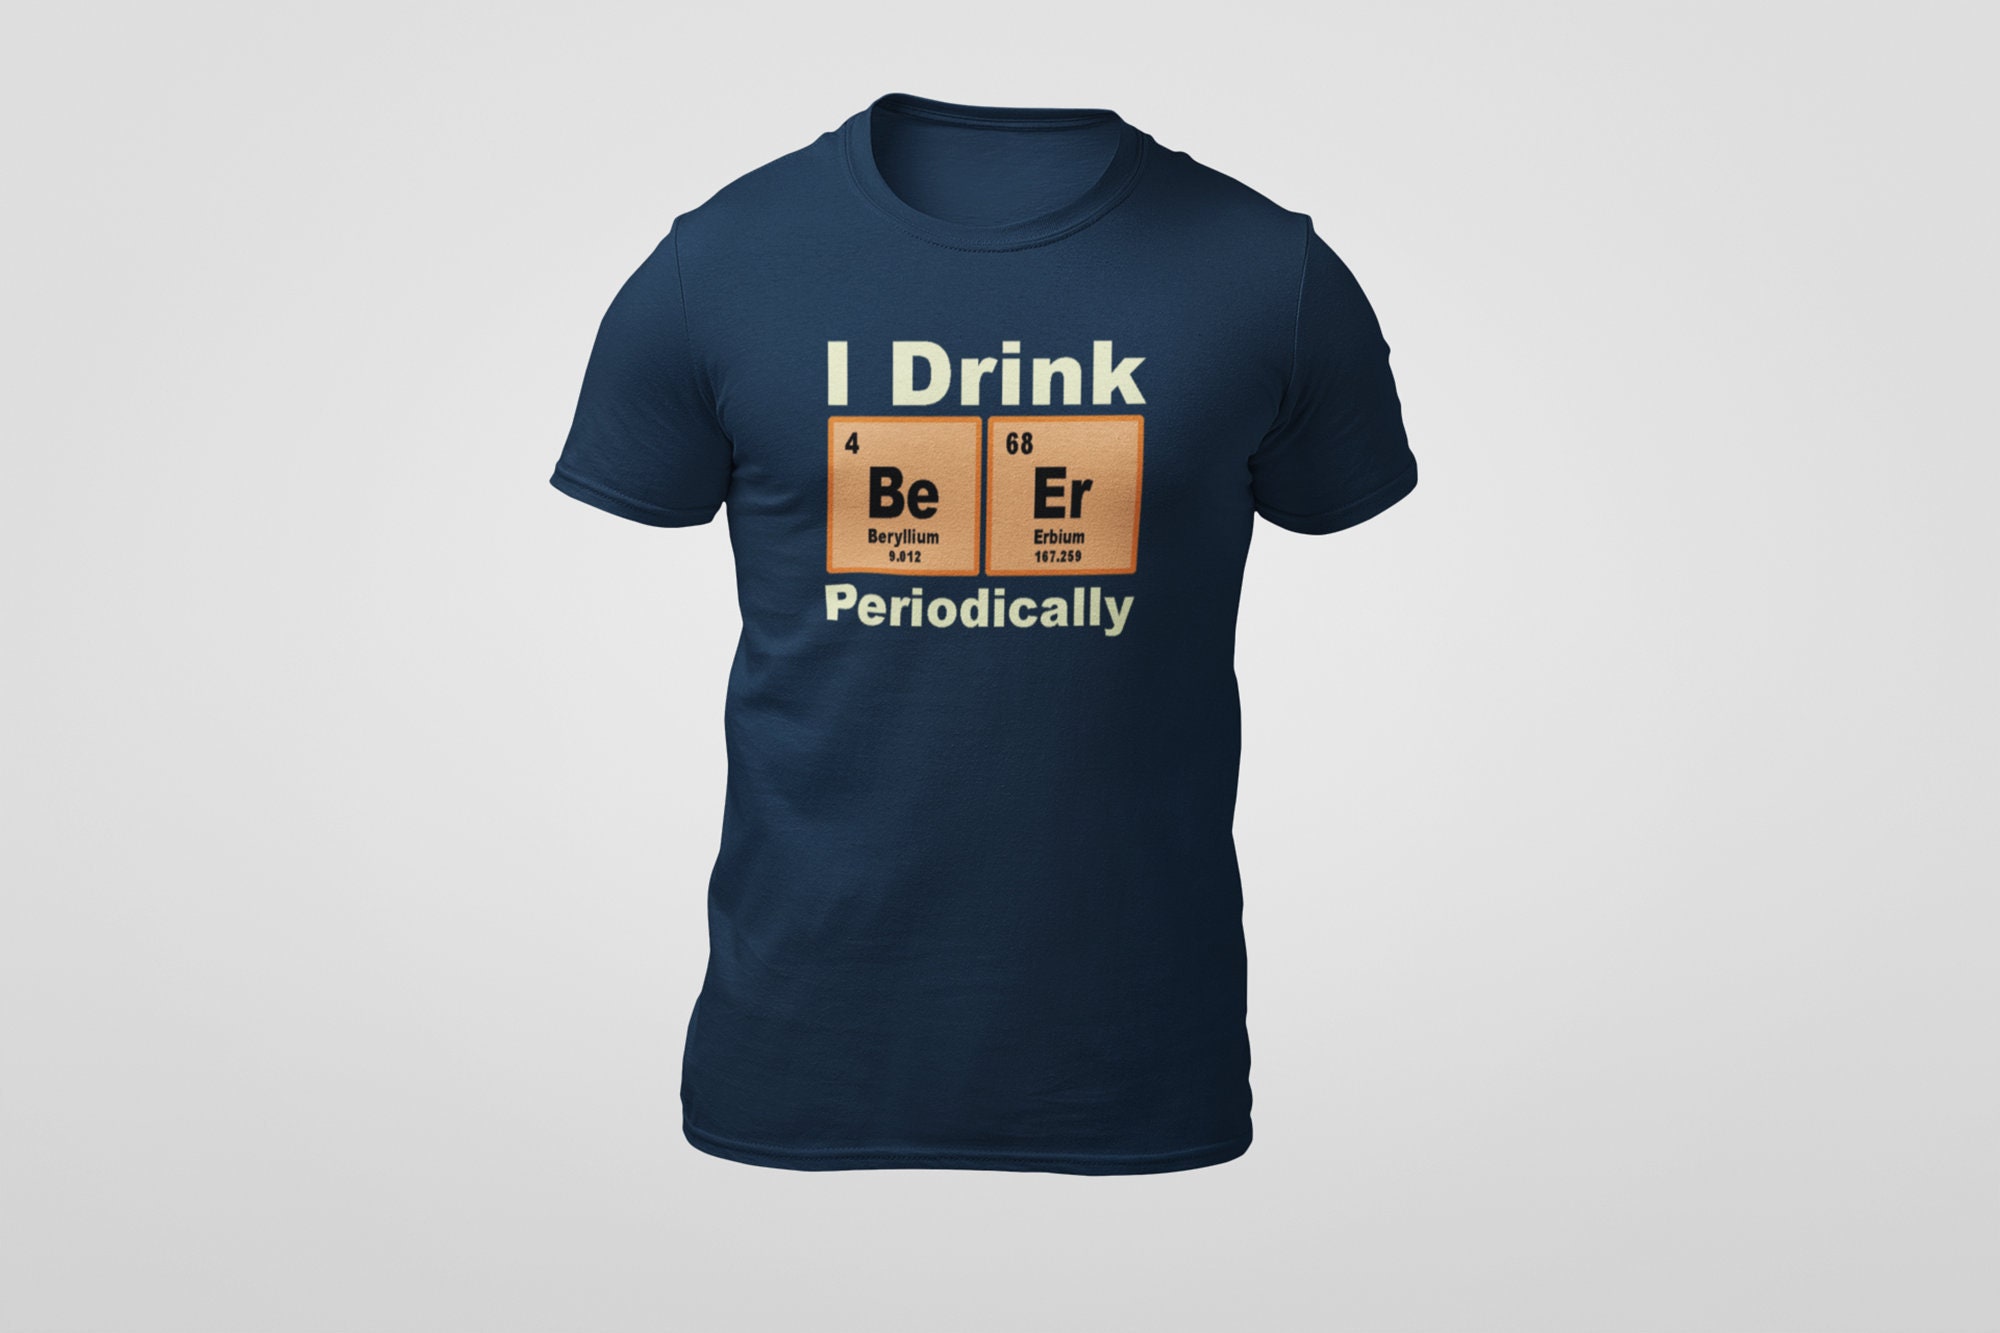 The Periodic Beer Drinker’s Shirt